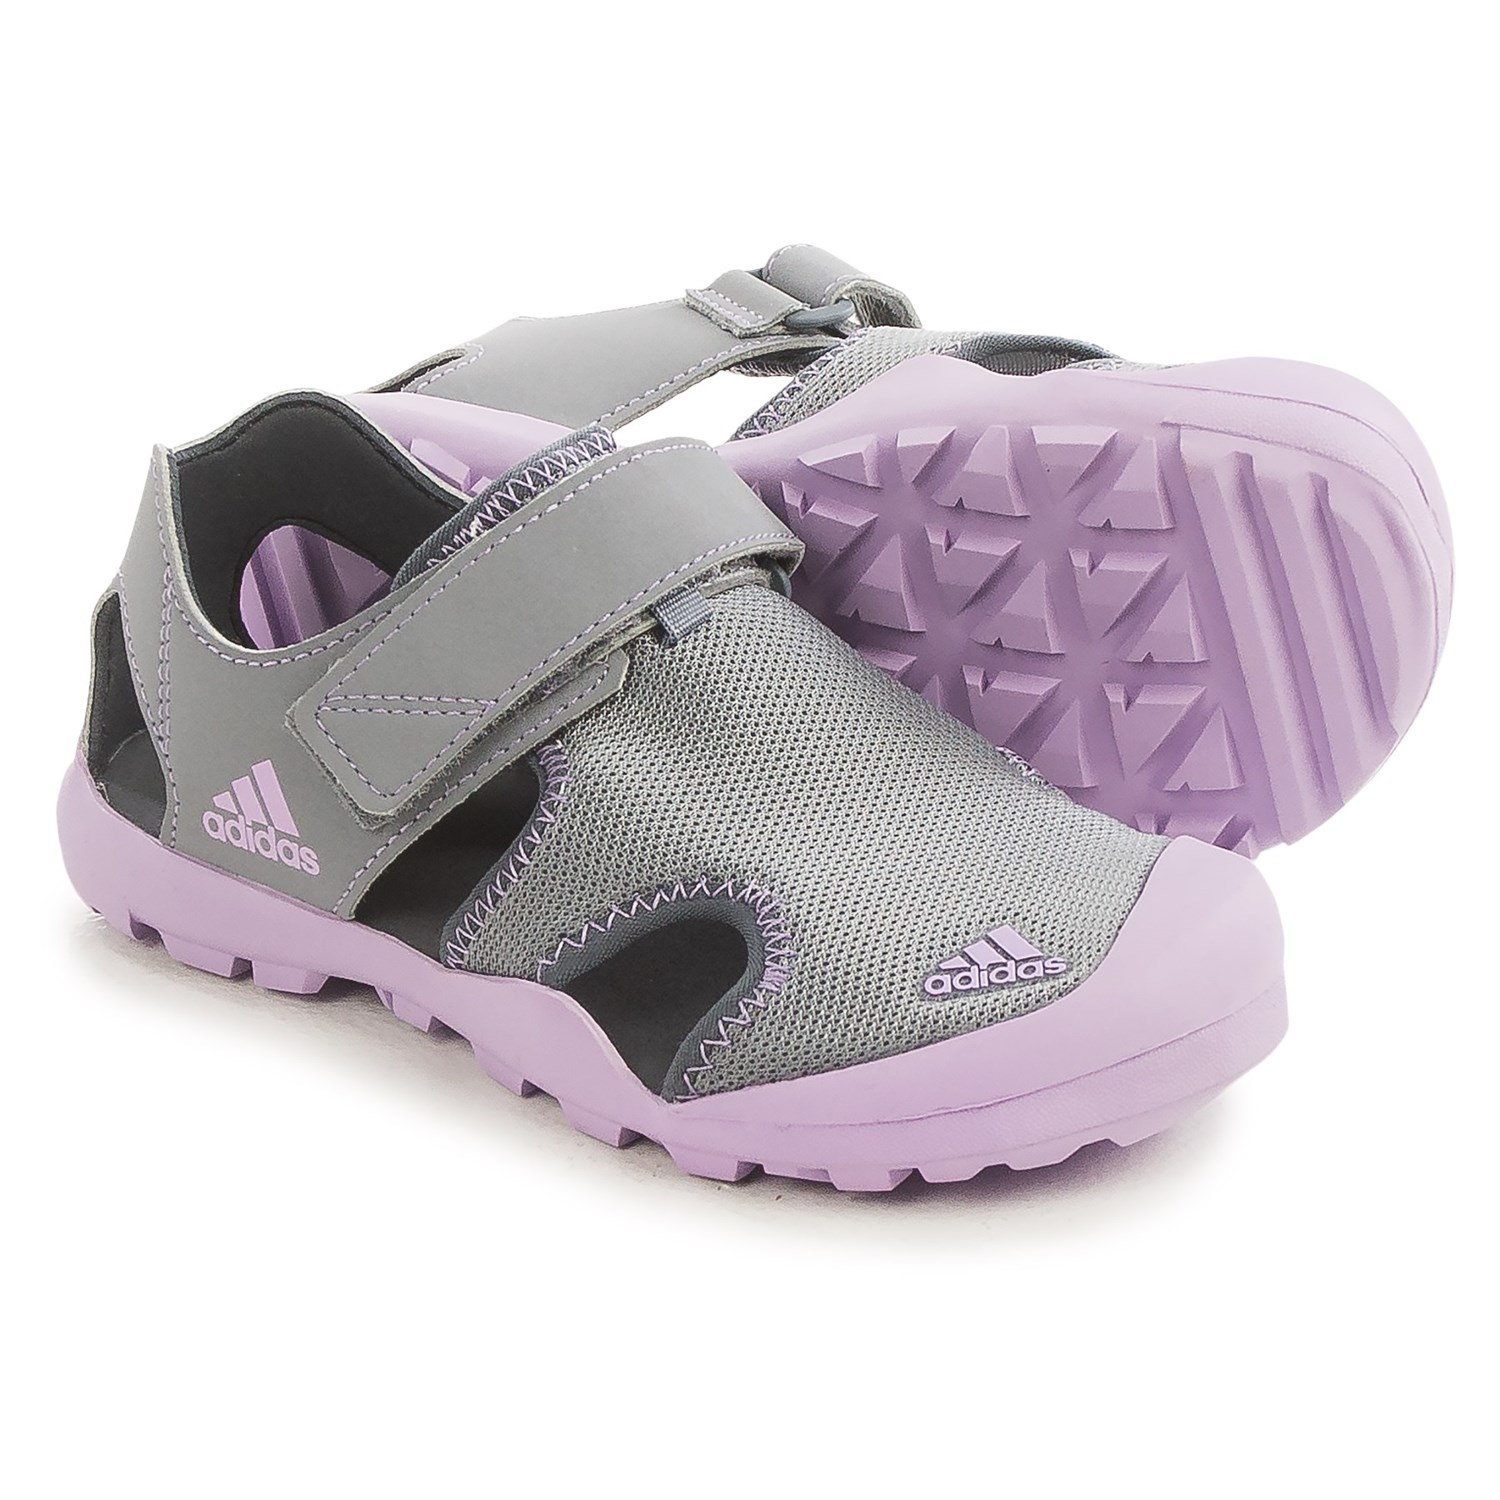 adidas Captain Toey Sport Sandals (For Little and Big Kids)